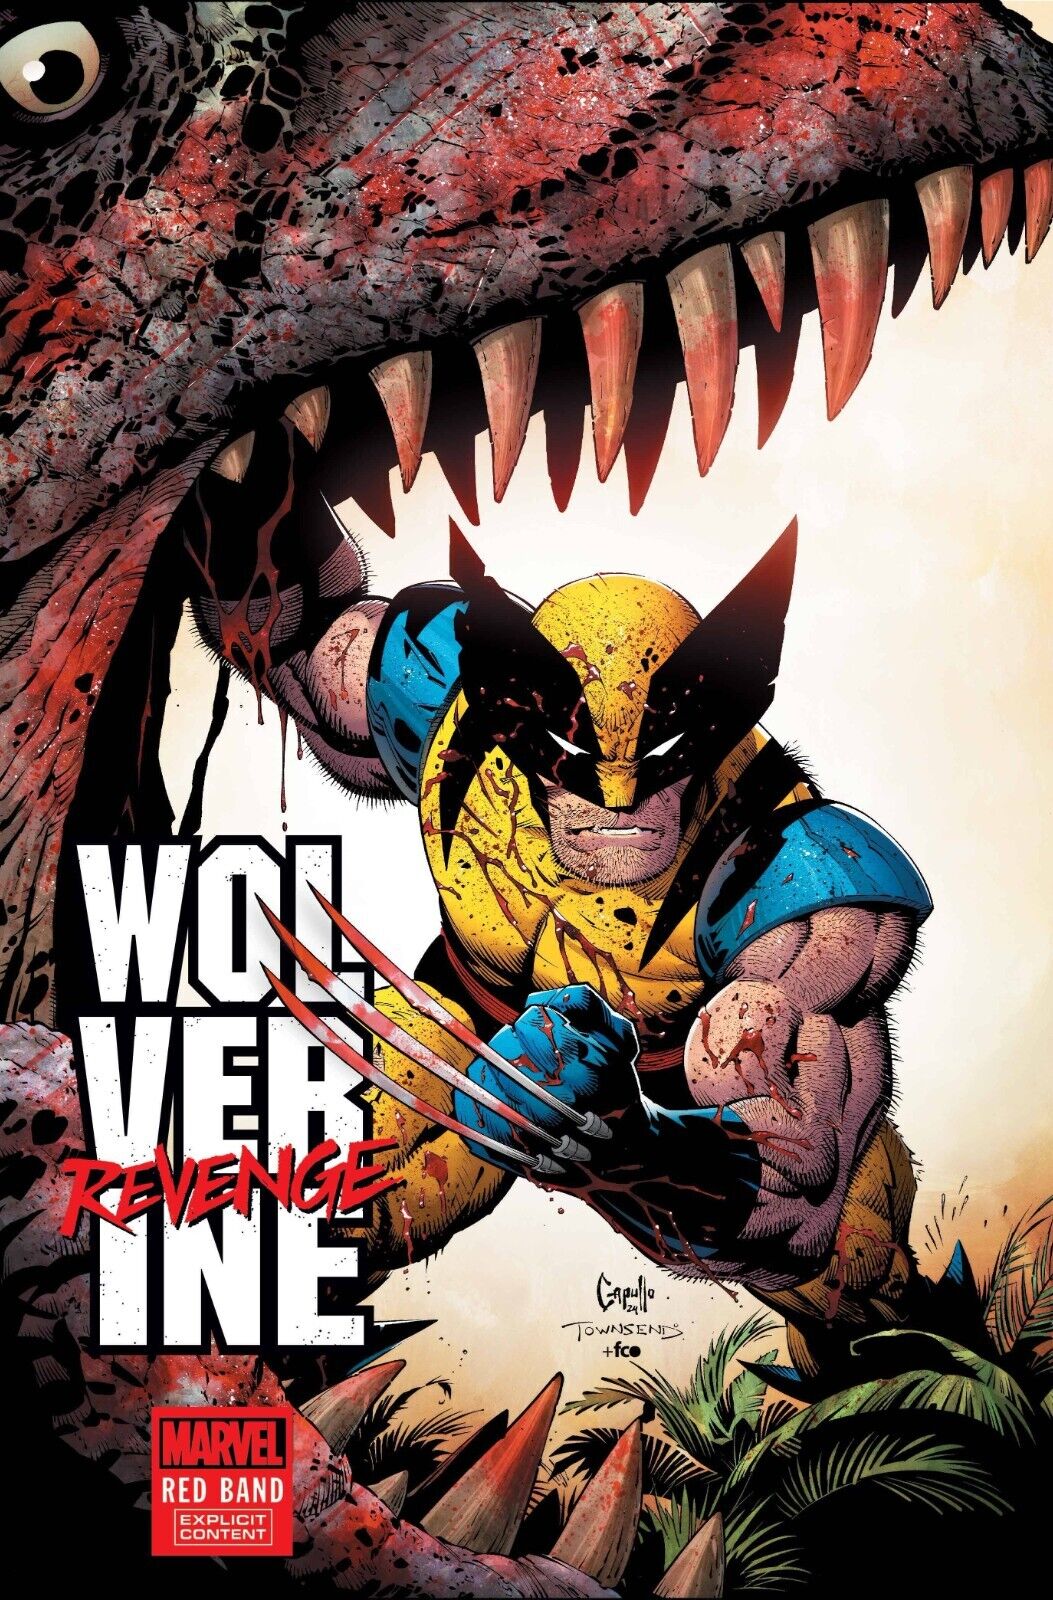 WOLVERINE REVENGE RED BAND #1 (OF 5) [POLYBAGGED] Capullo/Hickman-*8/21 PRESALE*